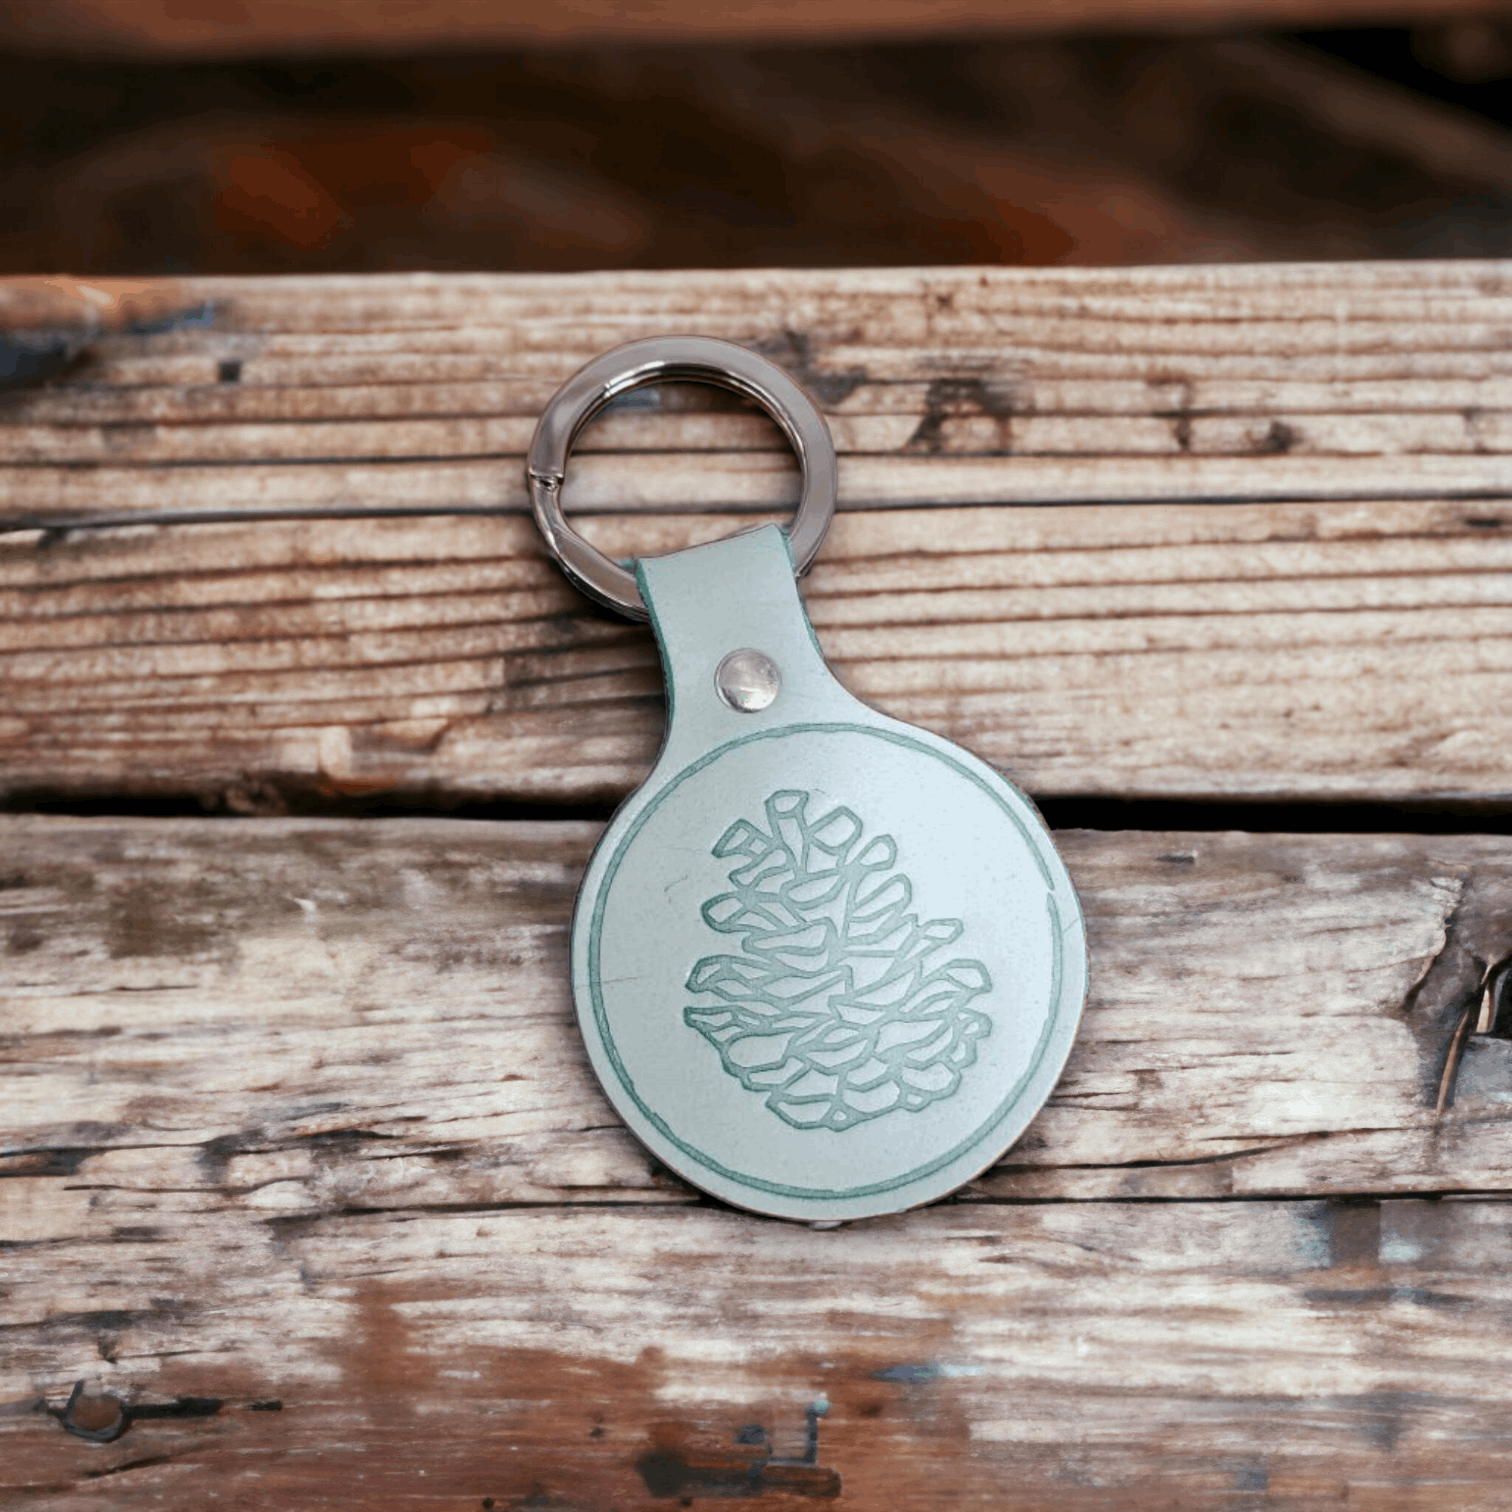 Tannery South Tannery South x Sawdust & Embers Pinecone Keychain